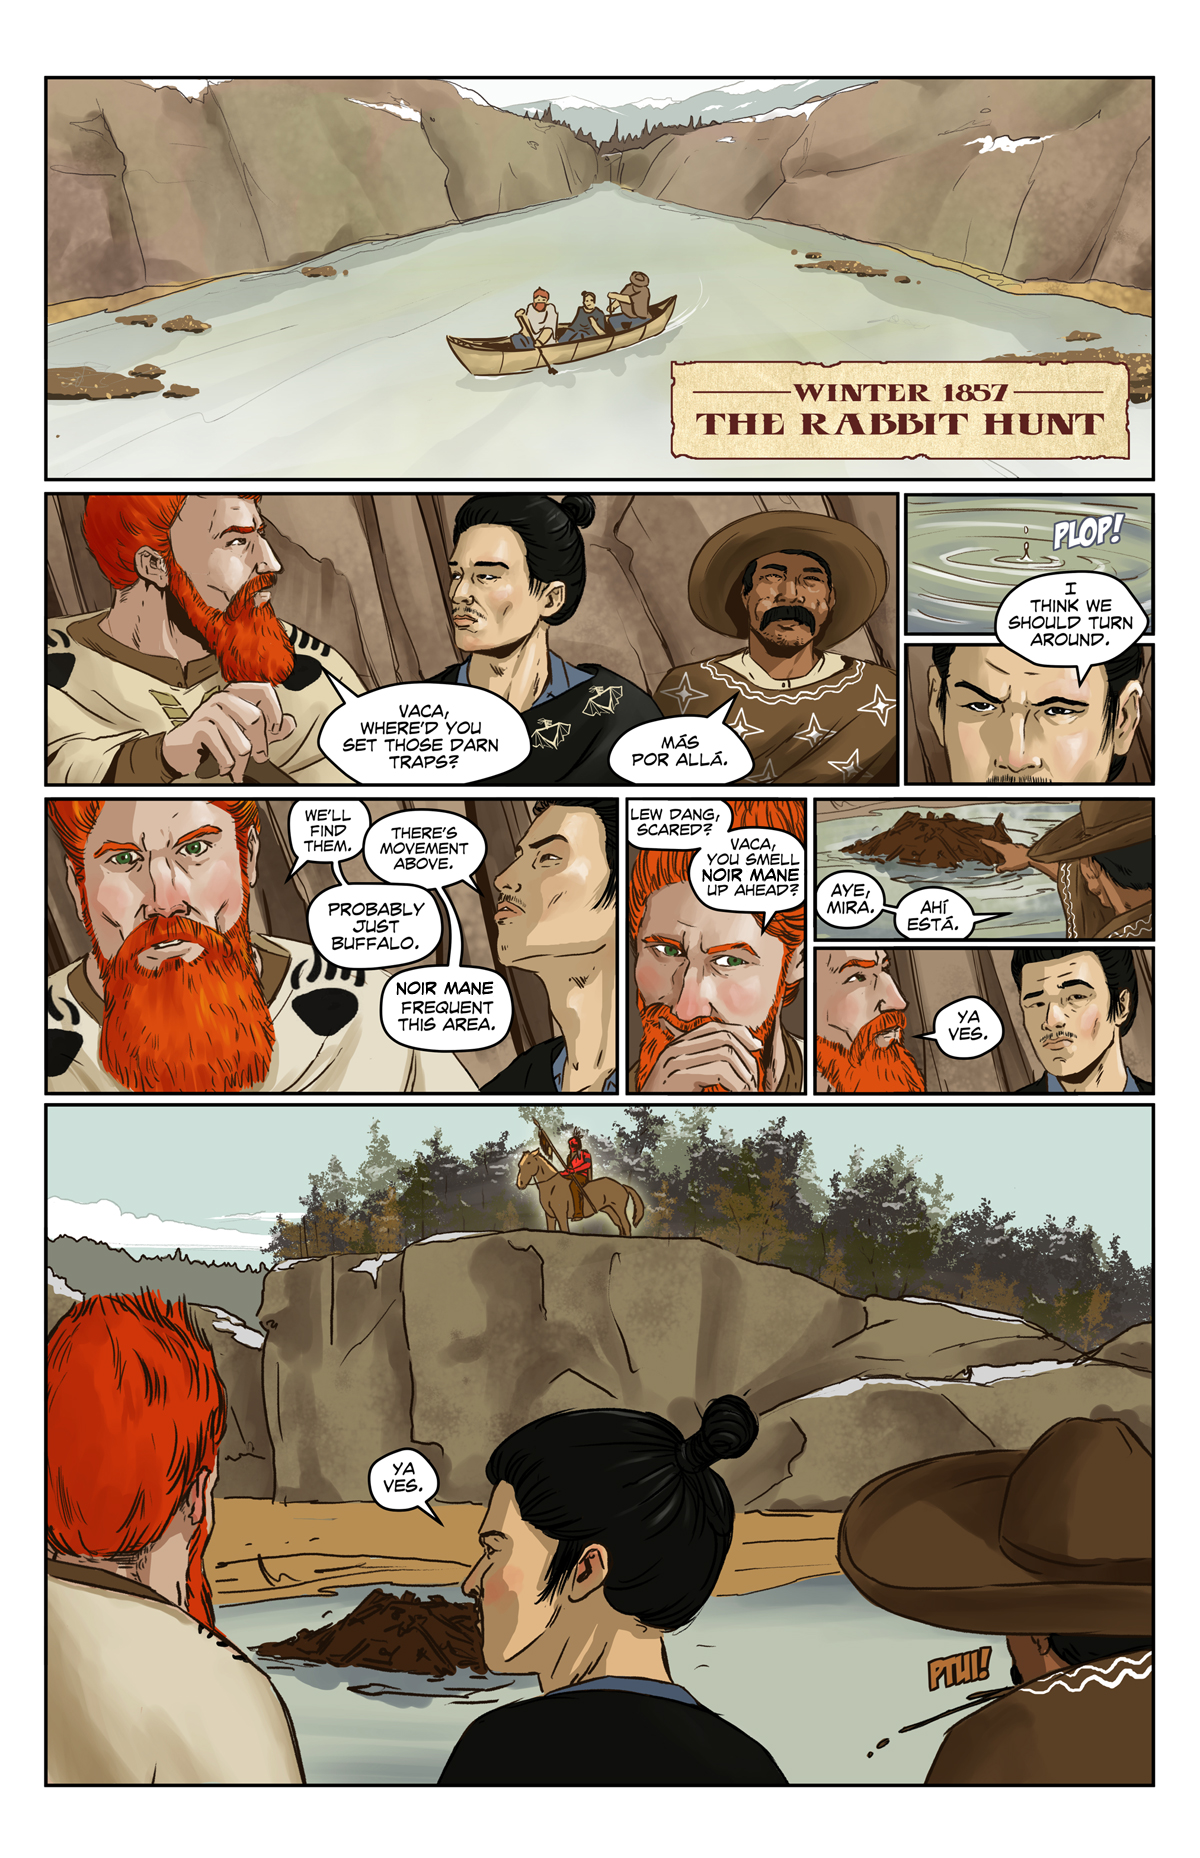 Episode 1, Page 2